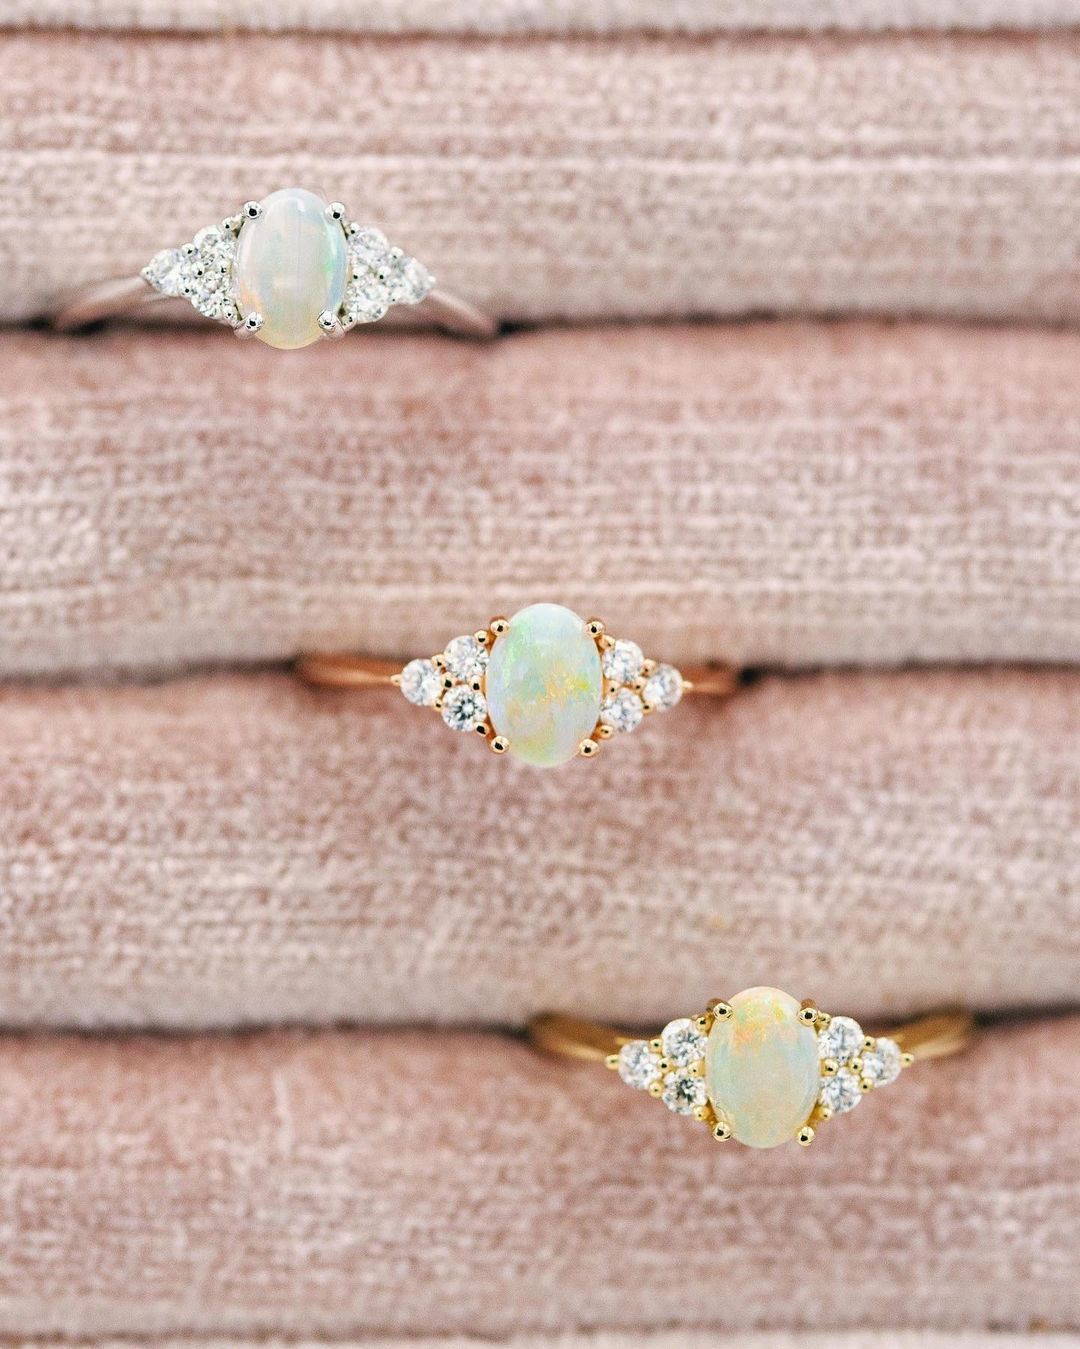 Rhea" – Oval White Opal Engagement Ring With Diamond Accents | White Opal  Engagement Ring, Engagement Rings Opal, Fashion Rings For Oval Opal Rings With Diamond Side Accents (View 5 of 25)